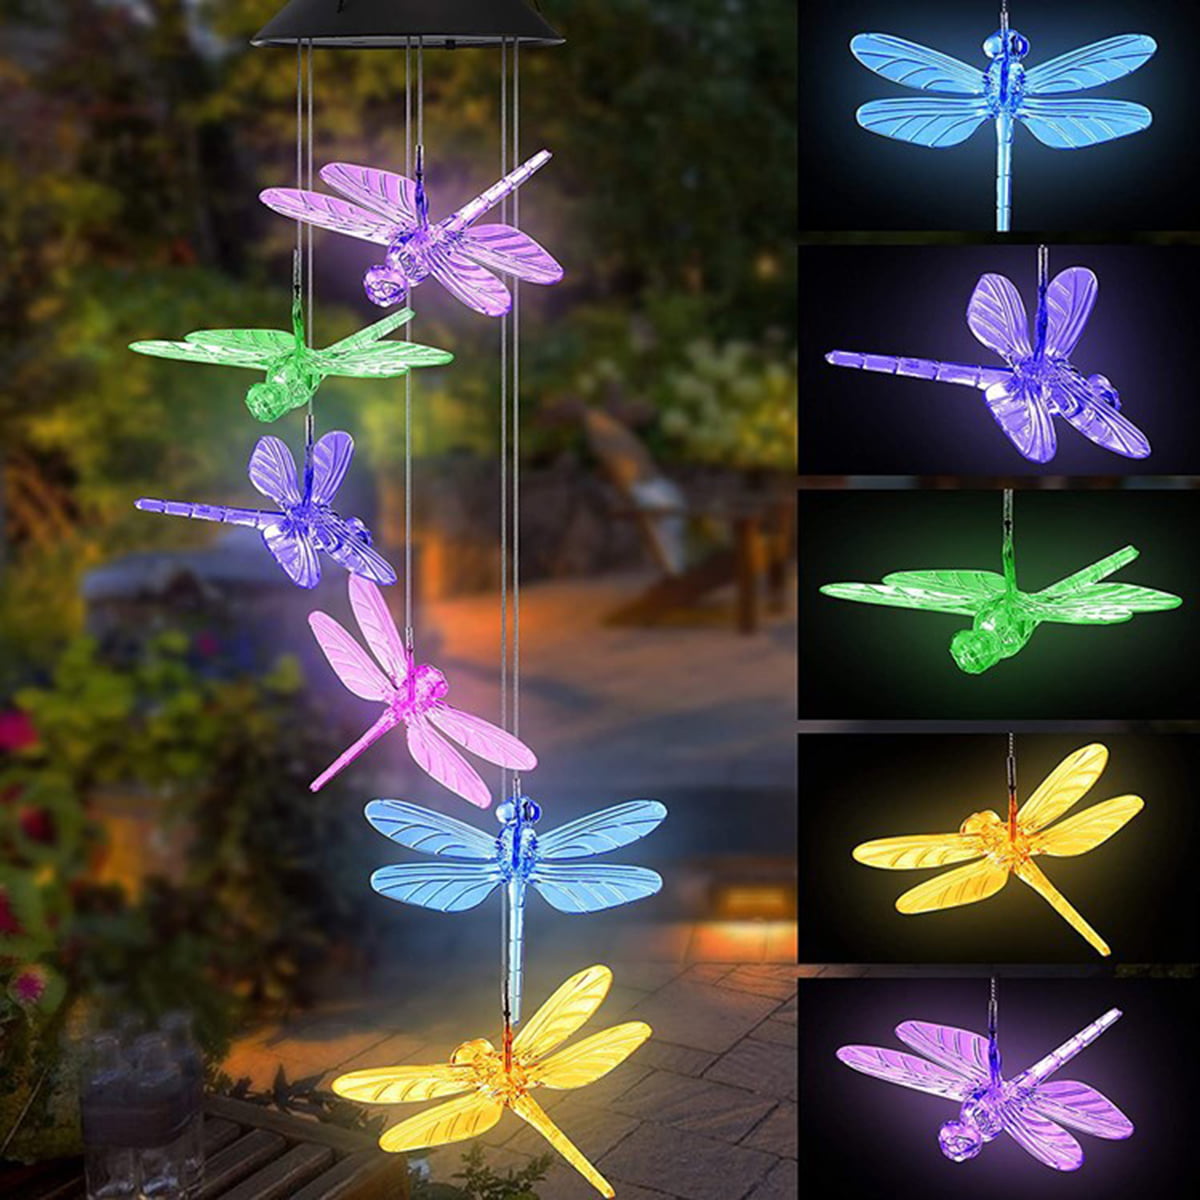 Solar Powered LED Wind Chimes Home Garden Yard Decor Light Lamp Color Changing